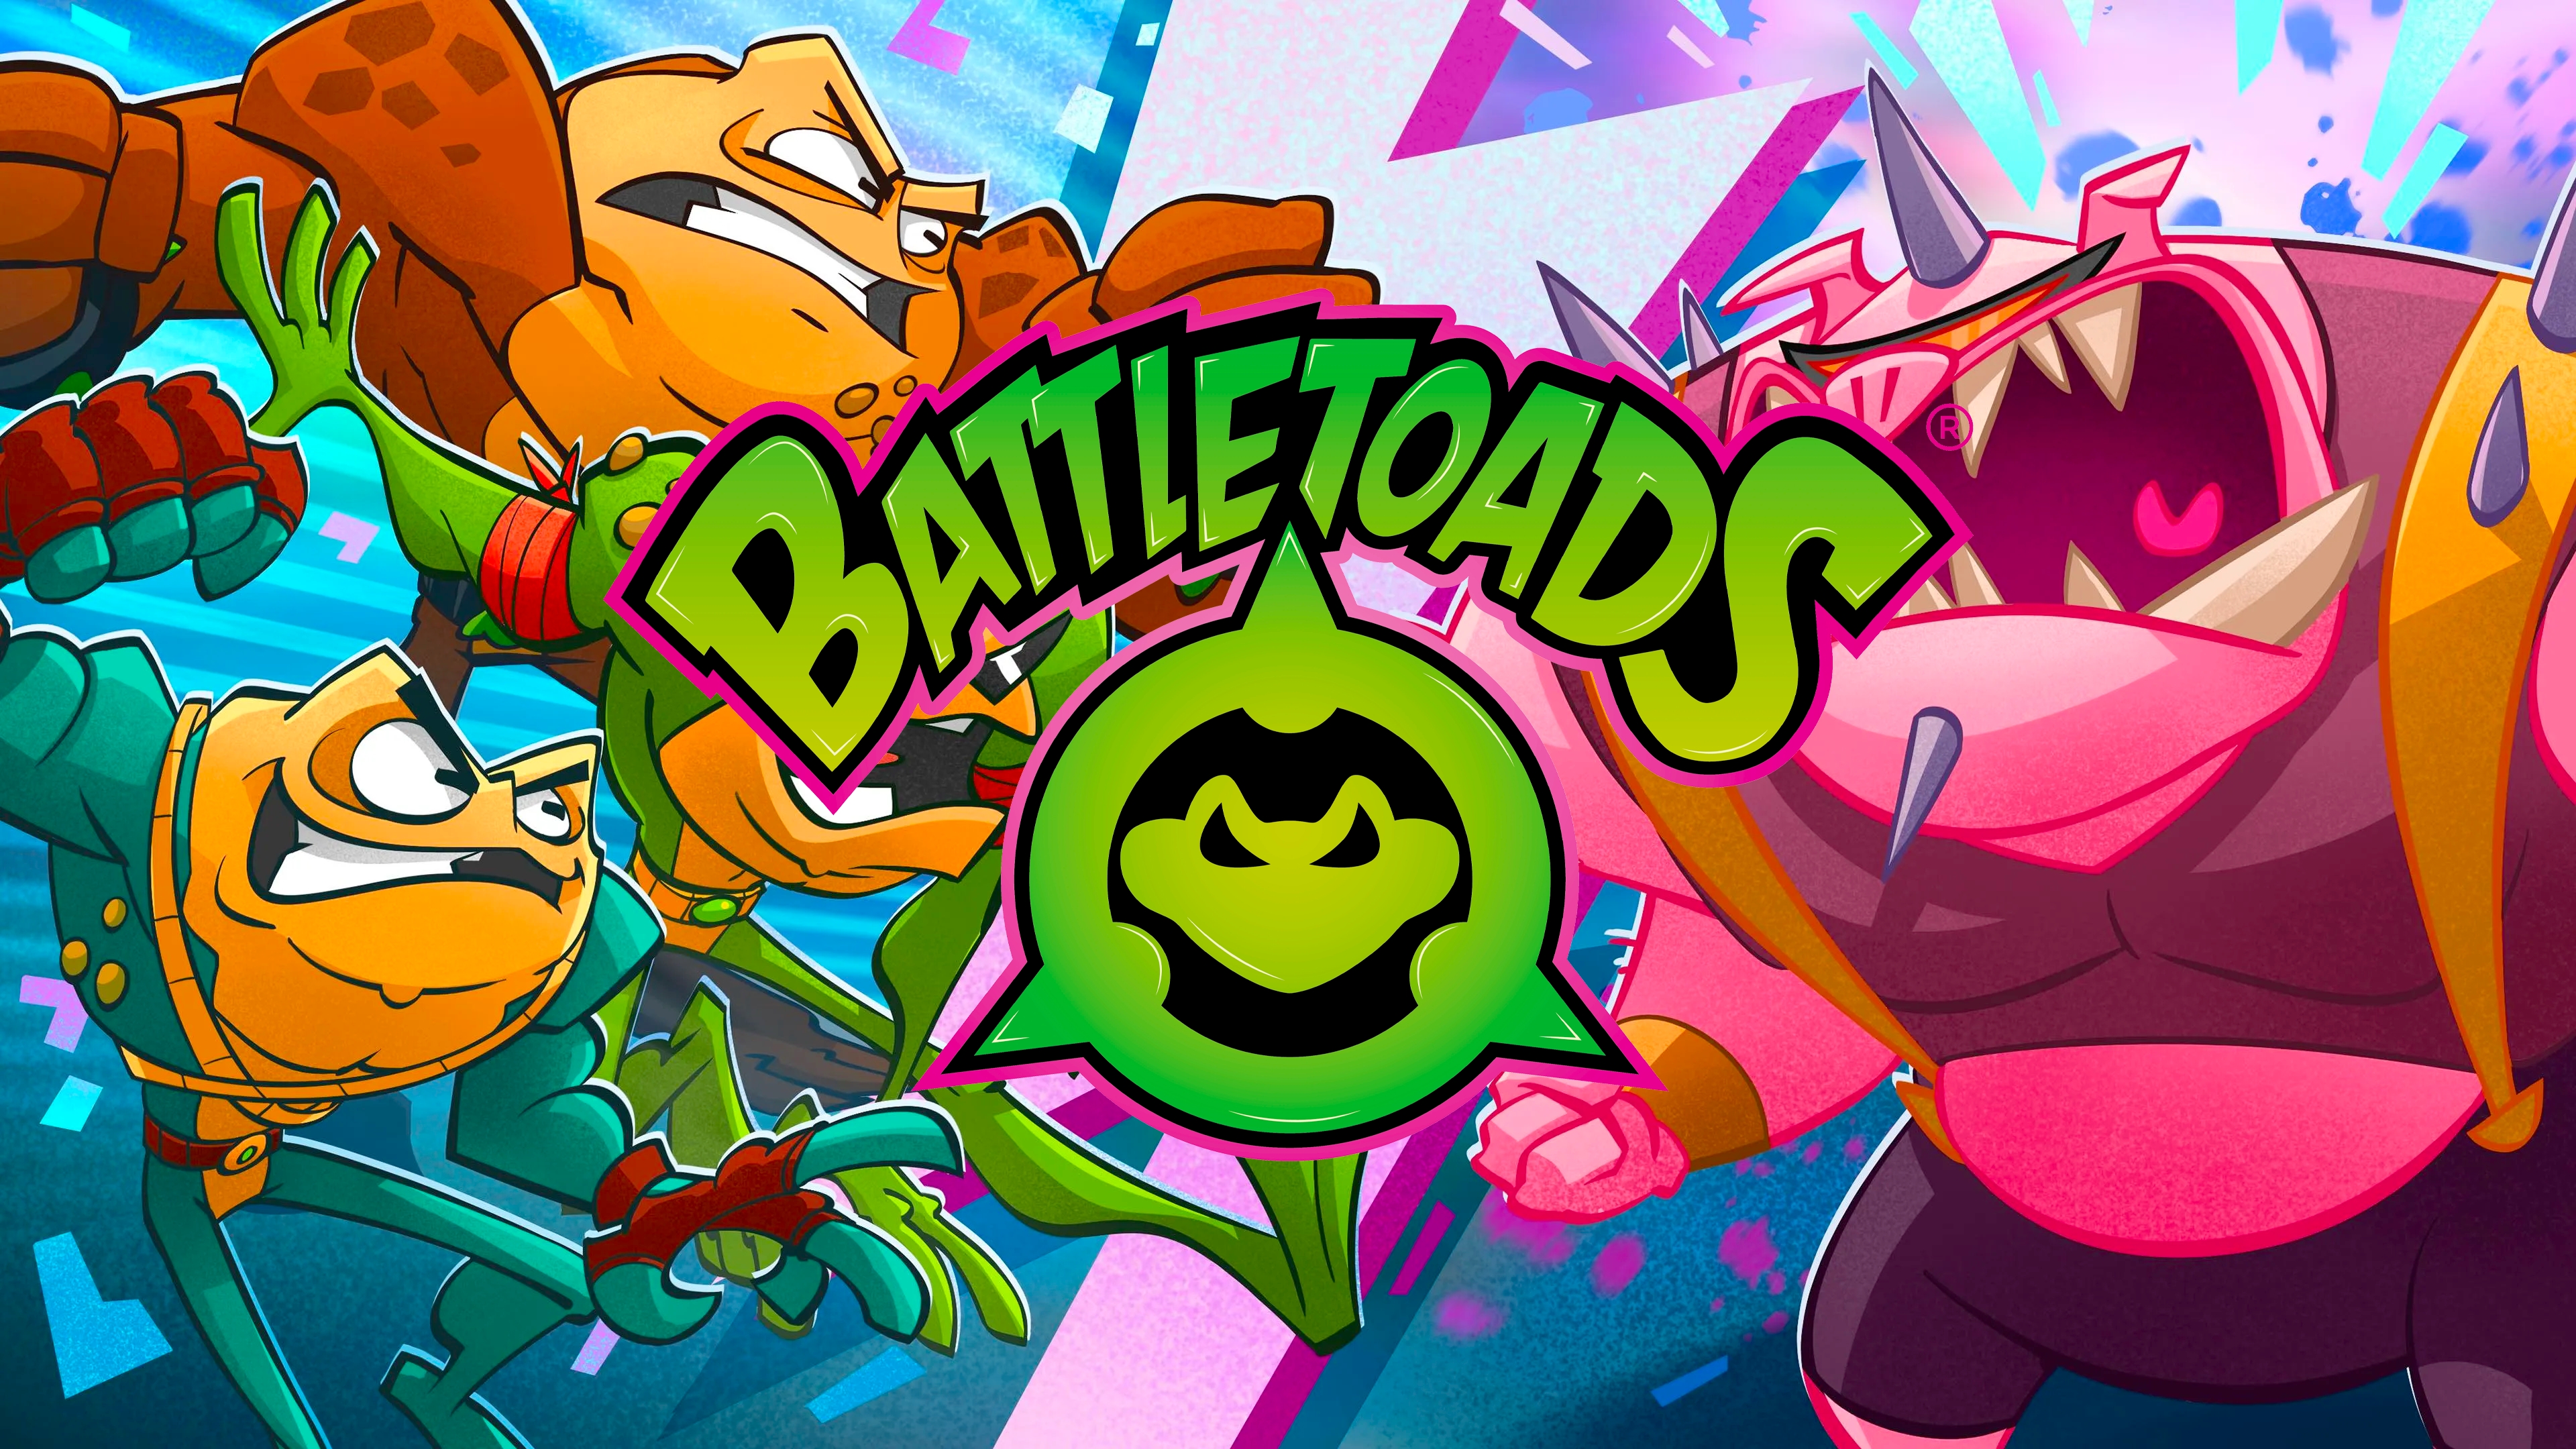 Battletoads (Digital Download) - For Xbox One and & Windows 10 PC - Full game  download included - ESRB Rated E (Everyone 10/) - 1-3 players supported 